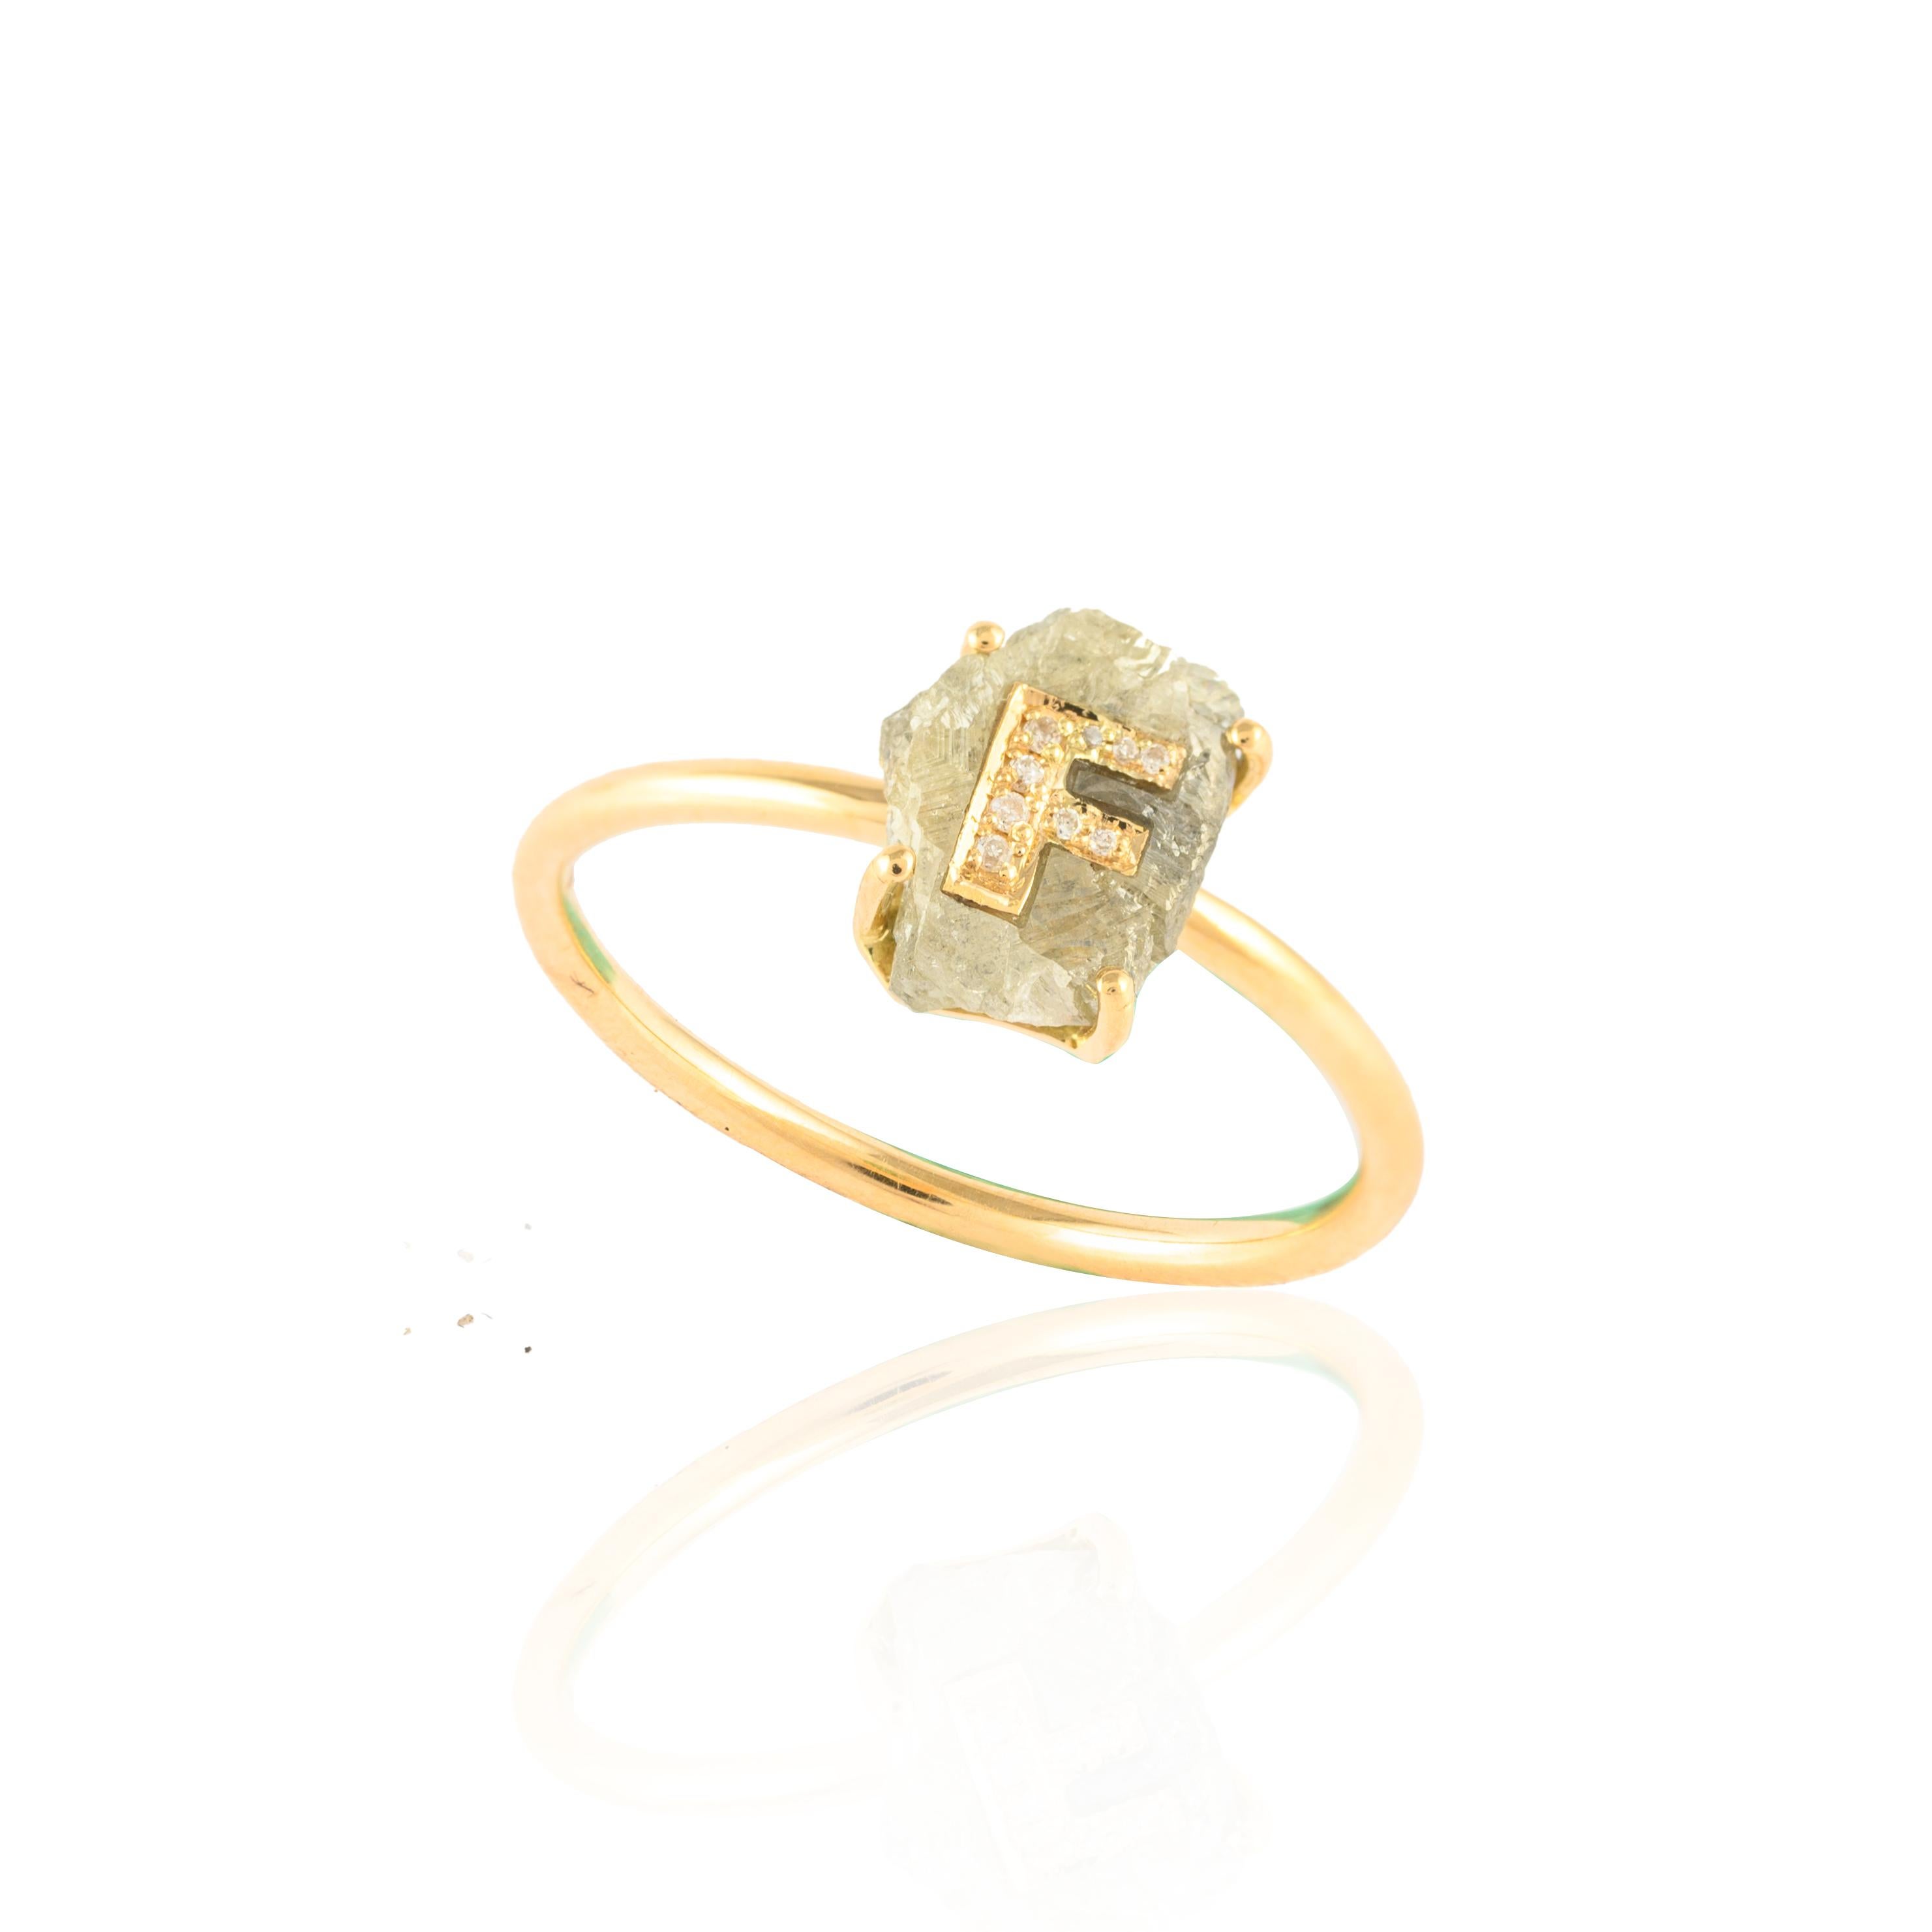 For Sale:  Minimal 18k Solid Yellow Gold 1.02ct Diamond Alphabet F Personalized Ring 9